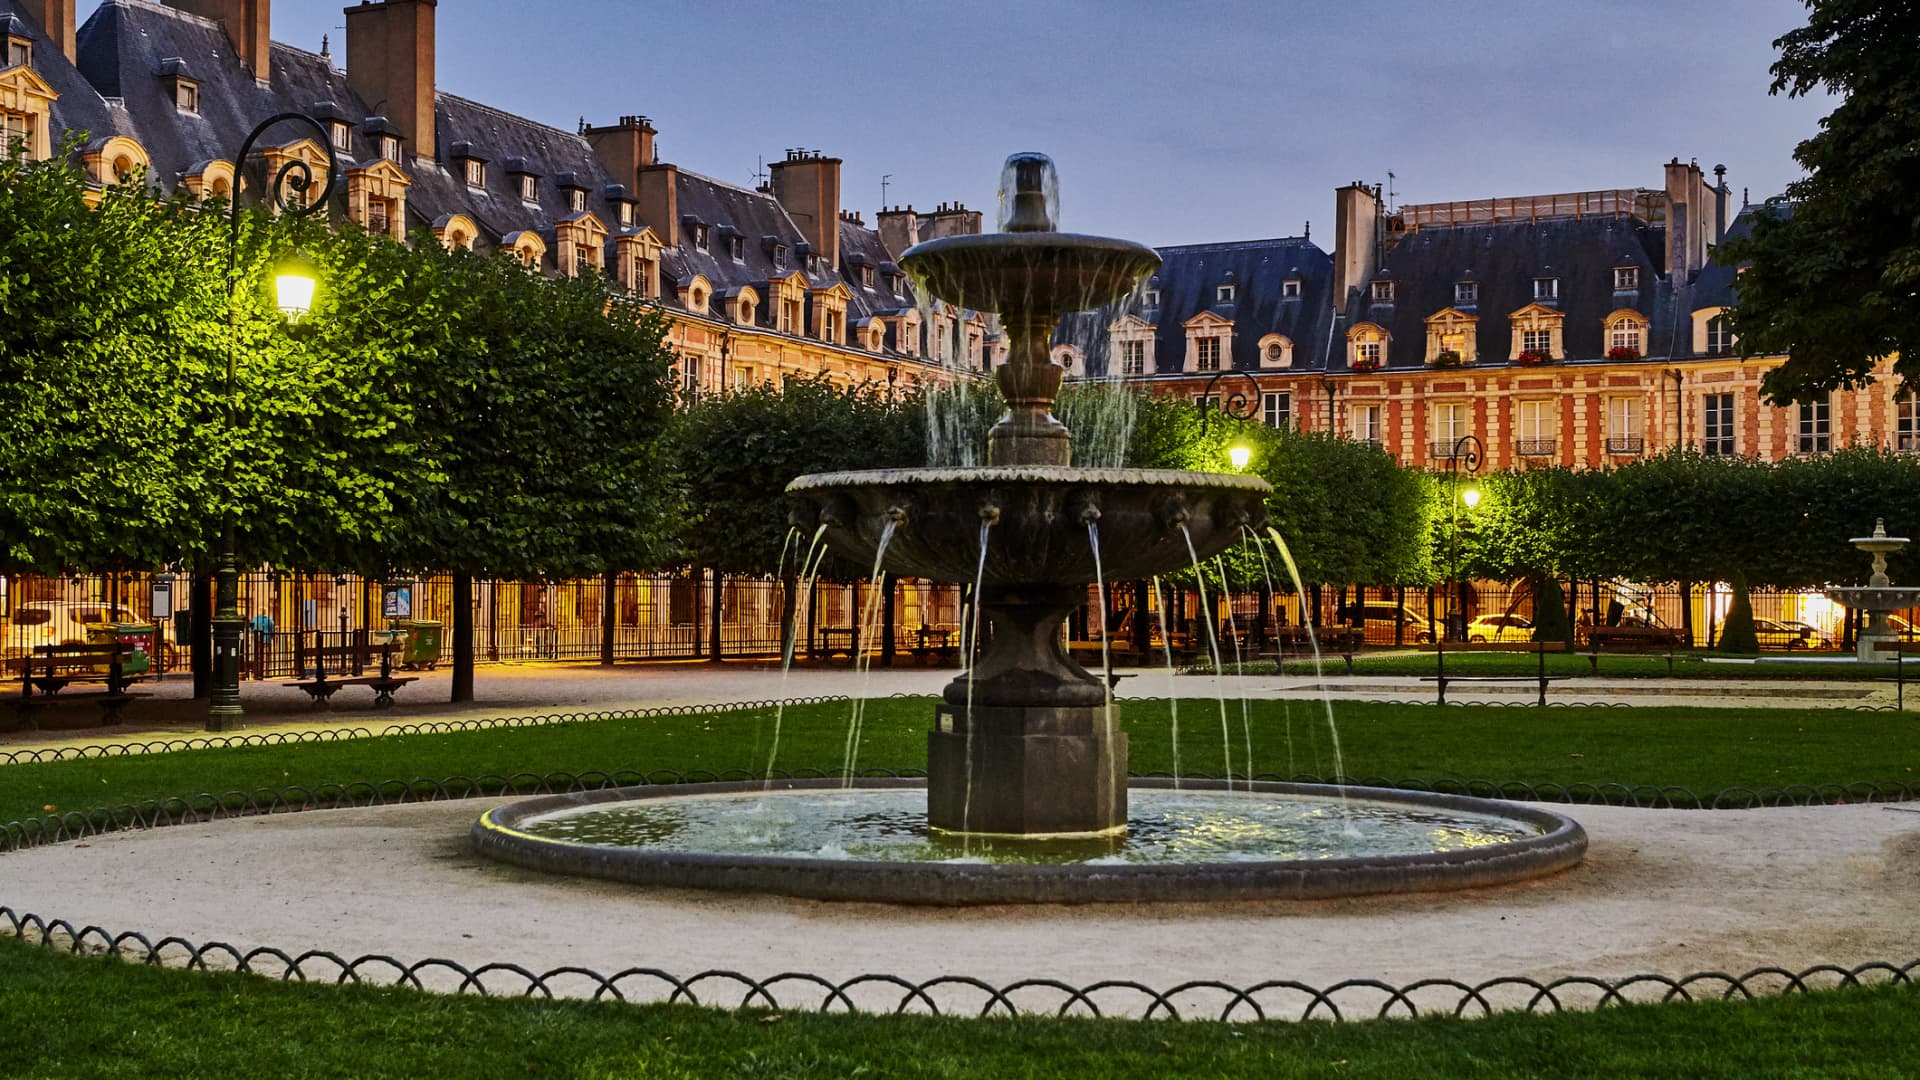 The Place Des Vosges, a square in the Marais district of Paris. Guests taking part in Stay Awhile's French baking course visit the area to sample gourmet delicacies.